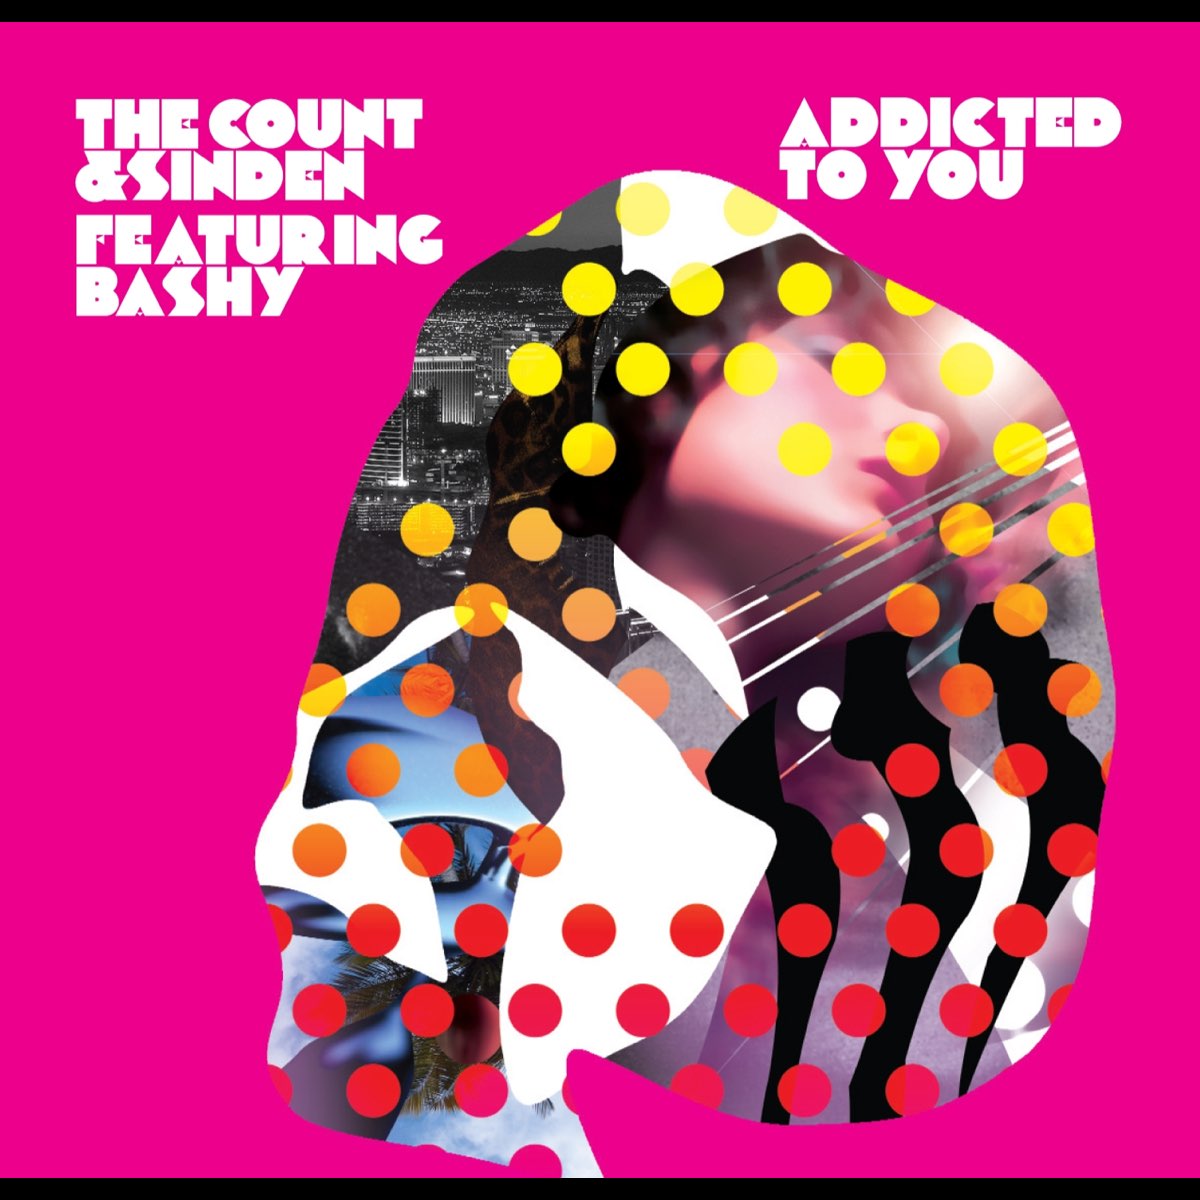 Addicted feat. Addicted to you. Addicted to you одежда. Album Art addicted to you. Addicted to you Krista Ritchie.